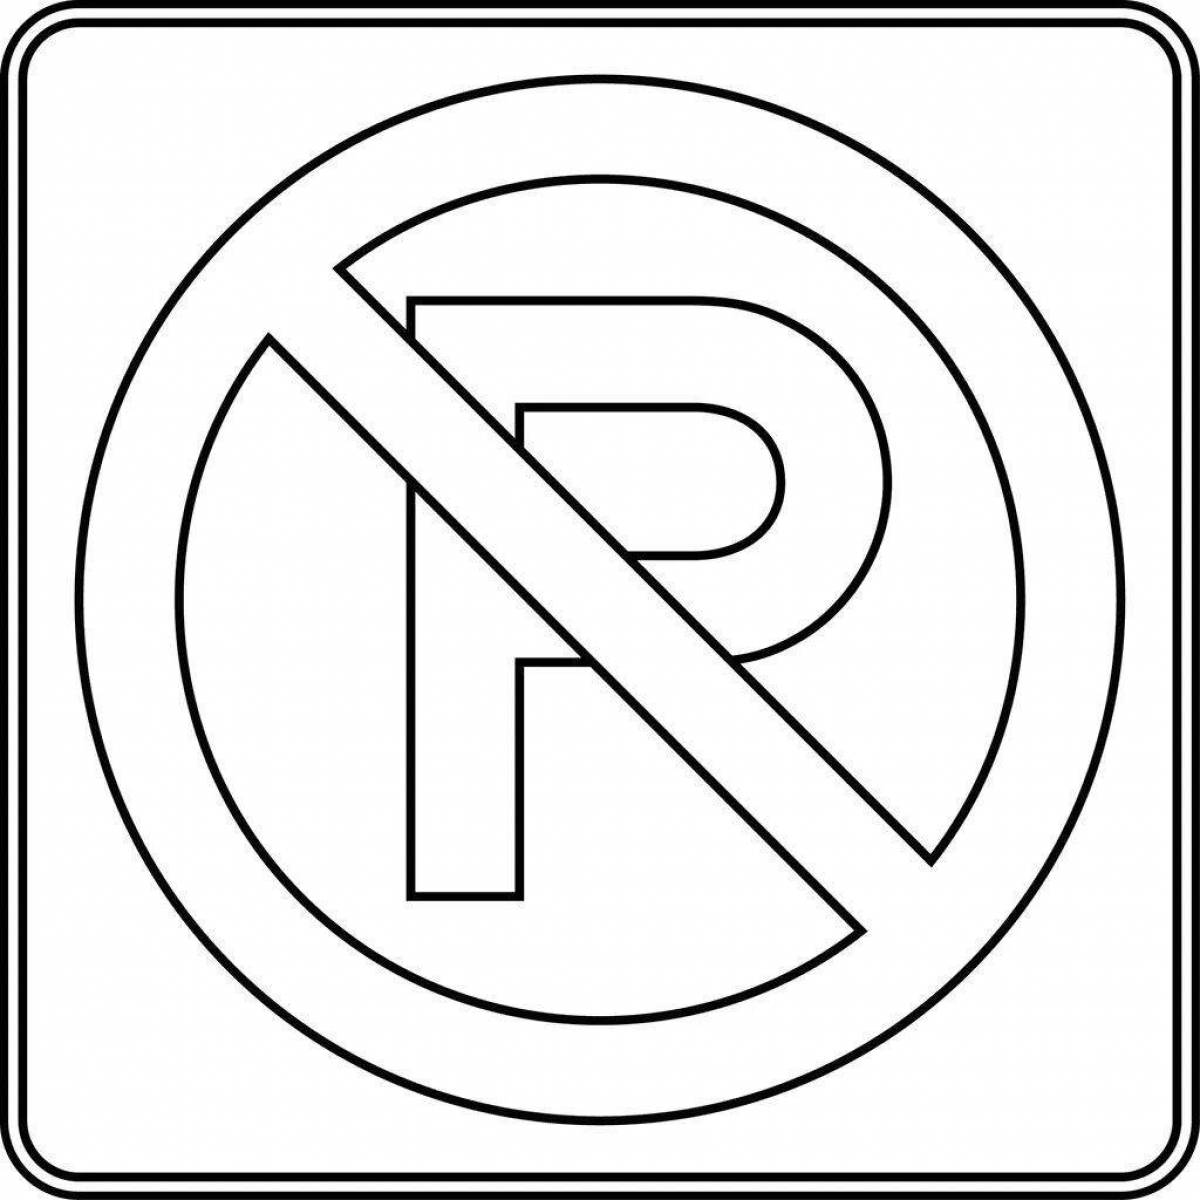 Complex road signs coloring pages for schoolchildren